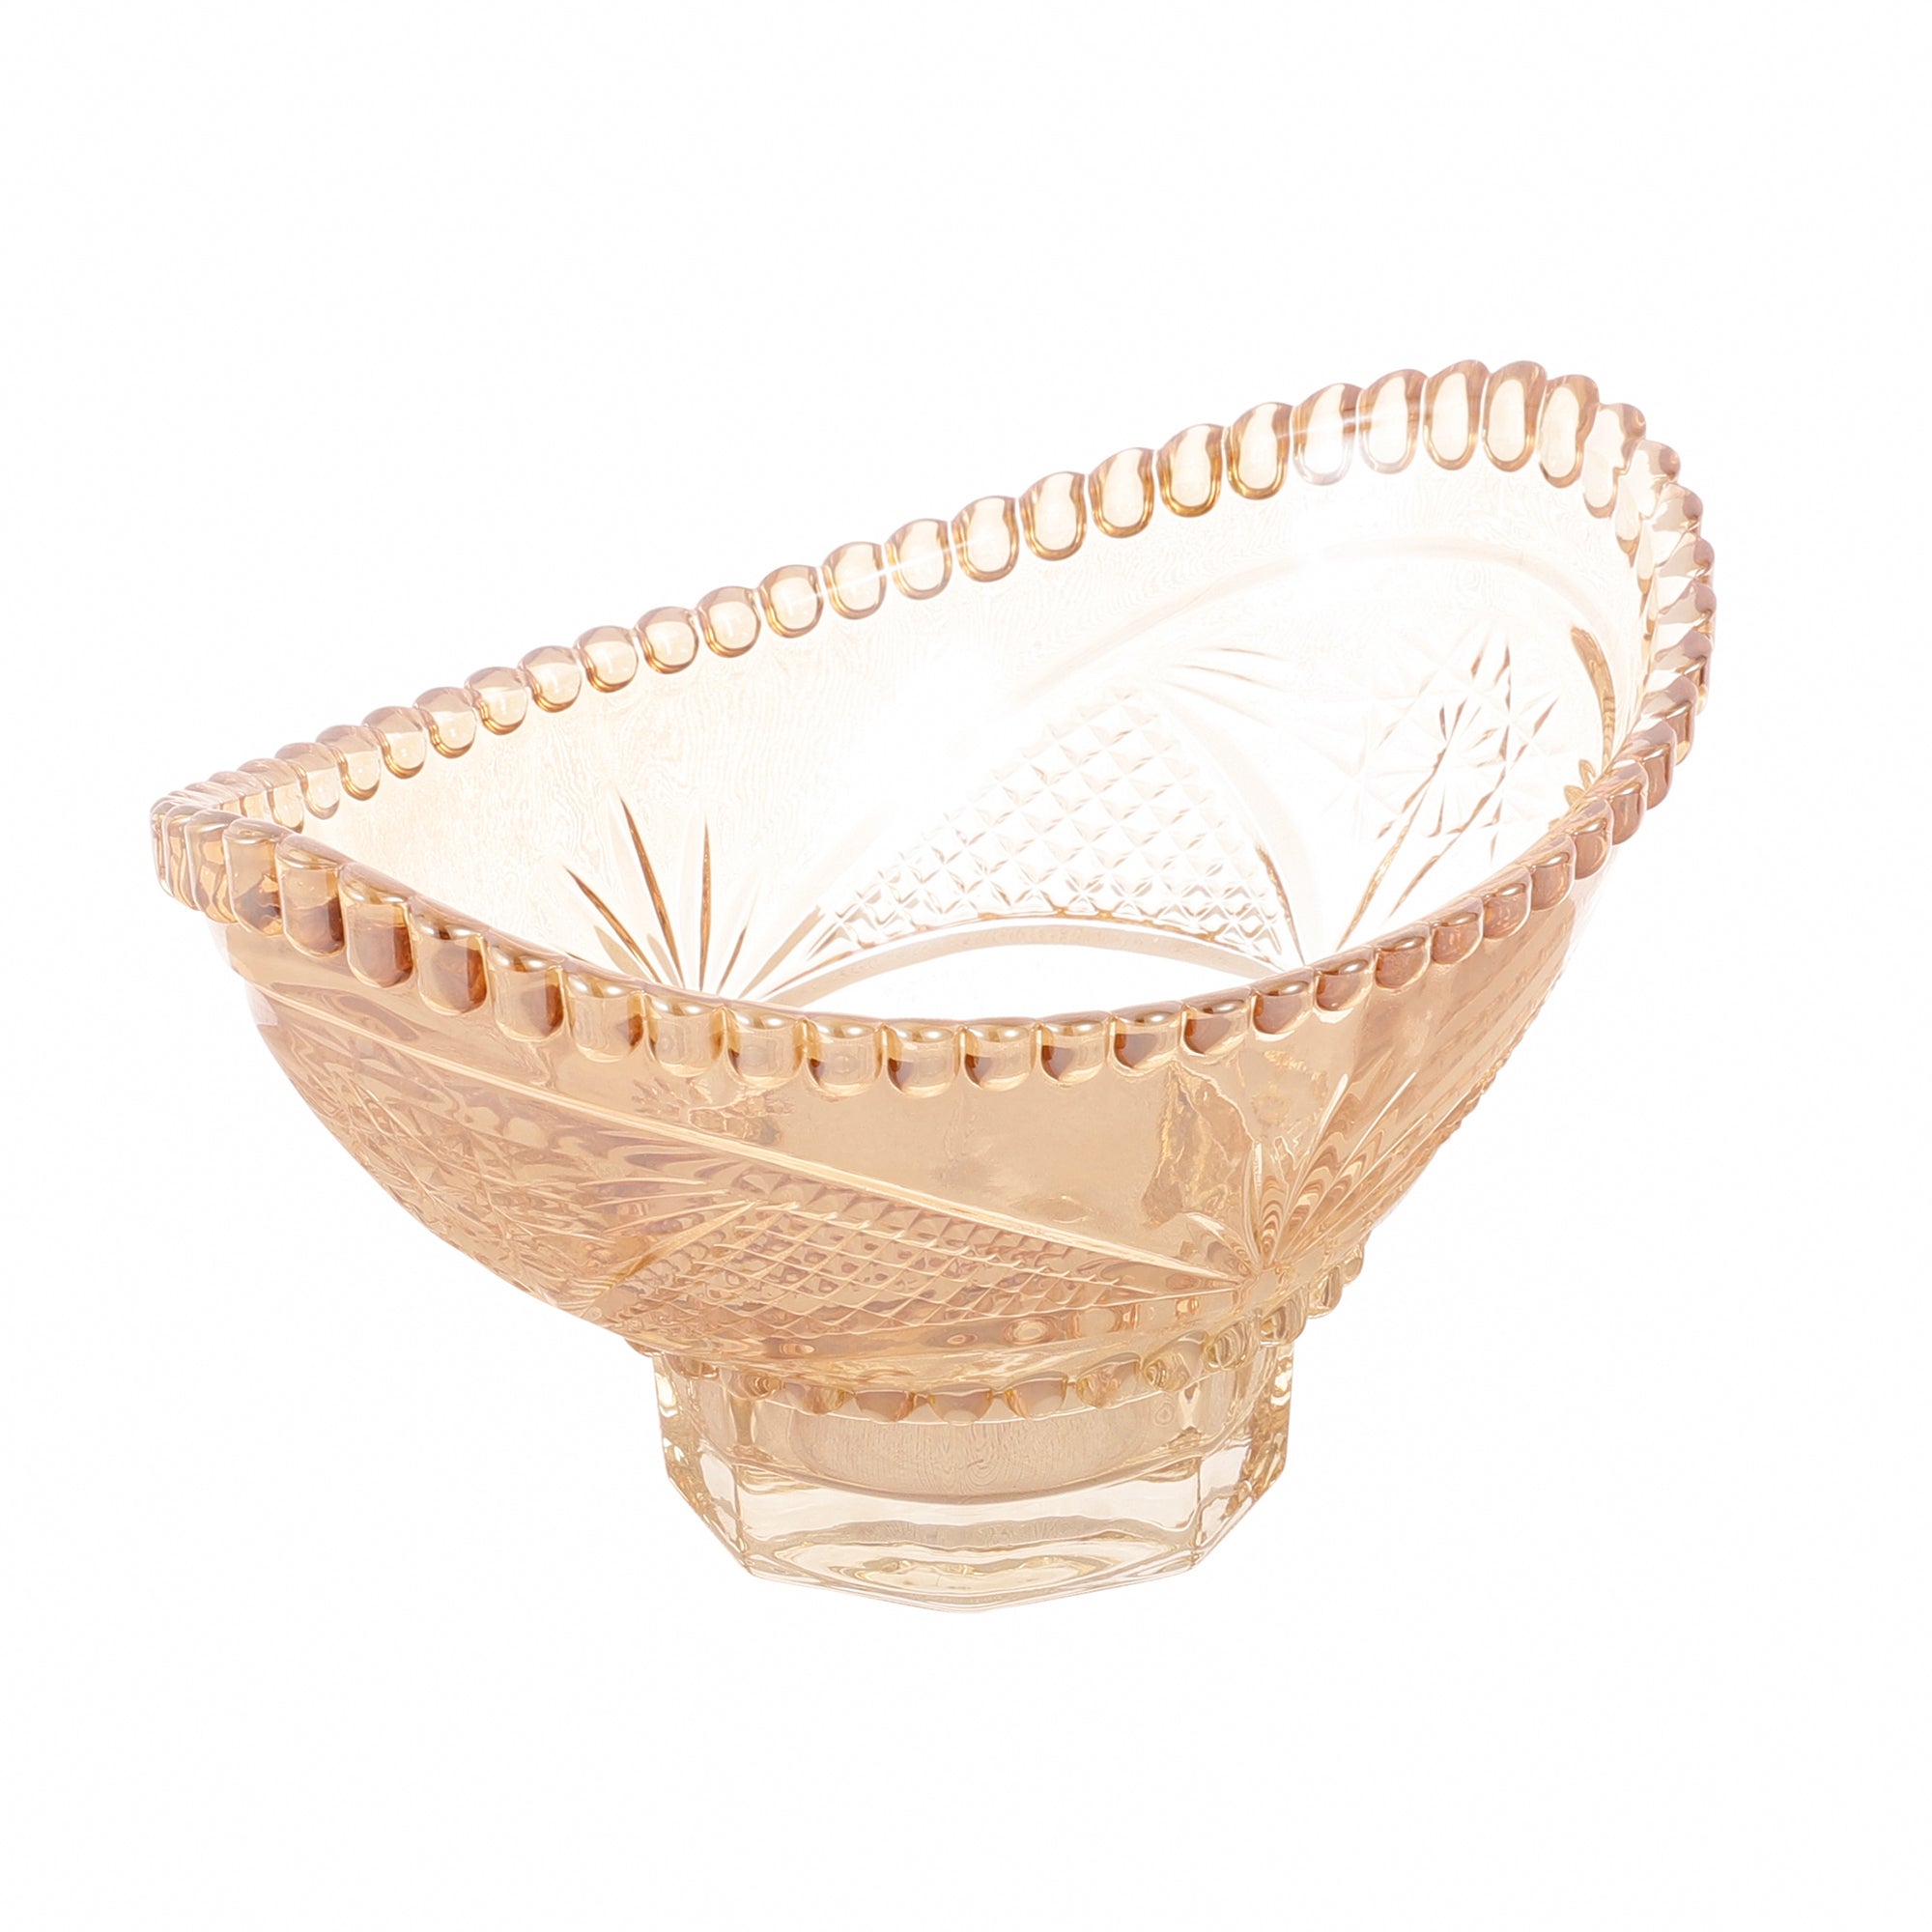 Boat Shaped Crystal Glass Serving Bowl